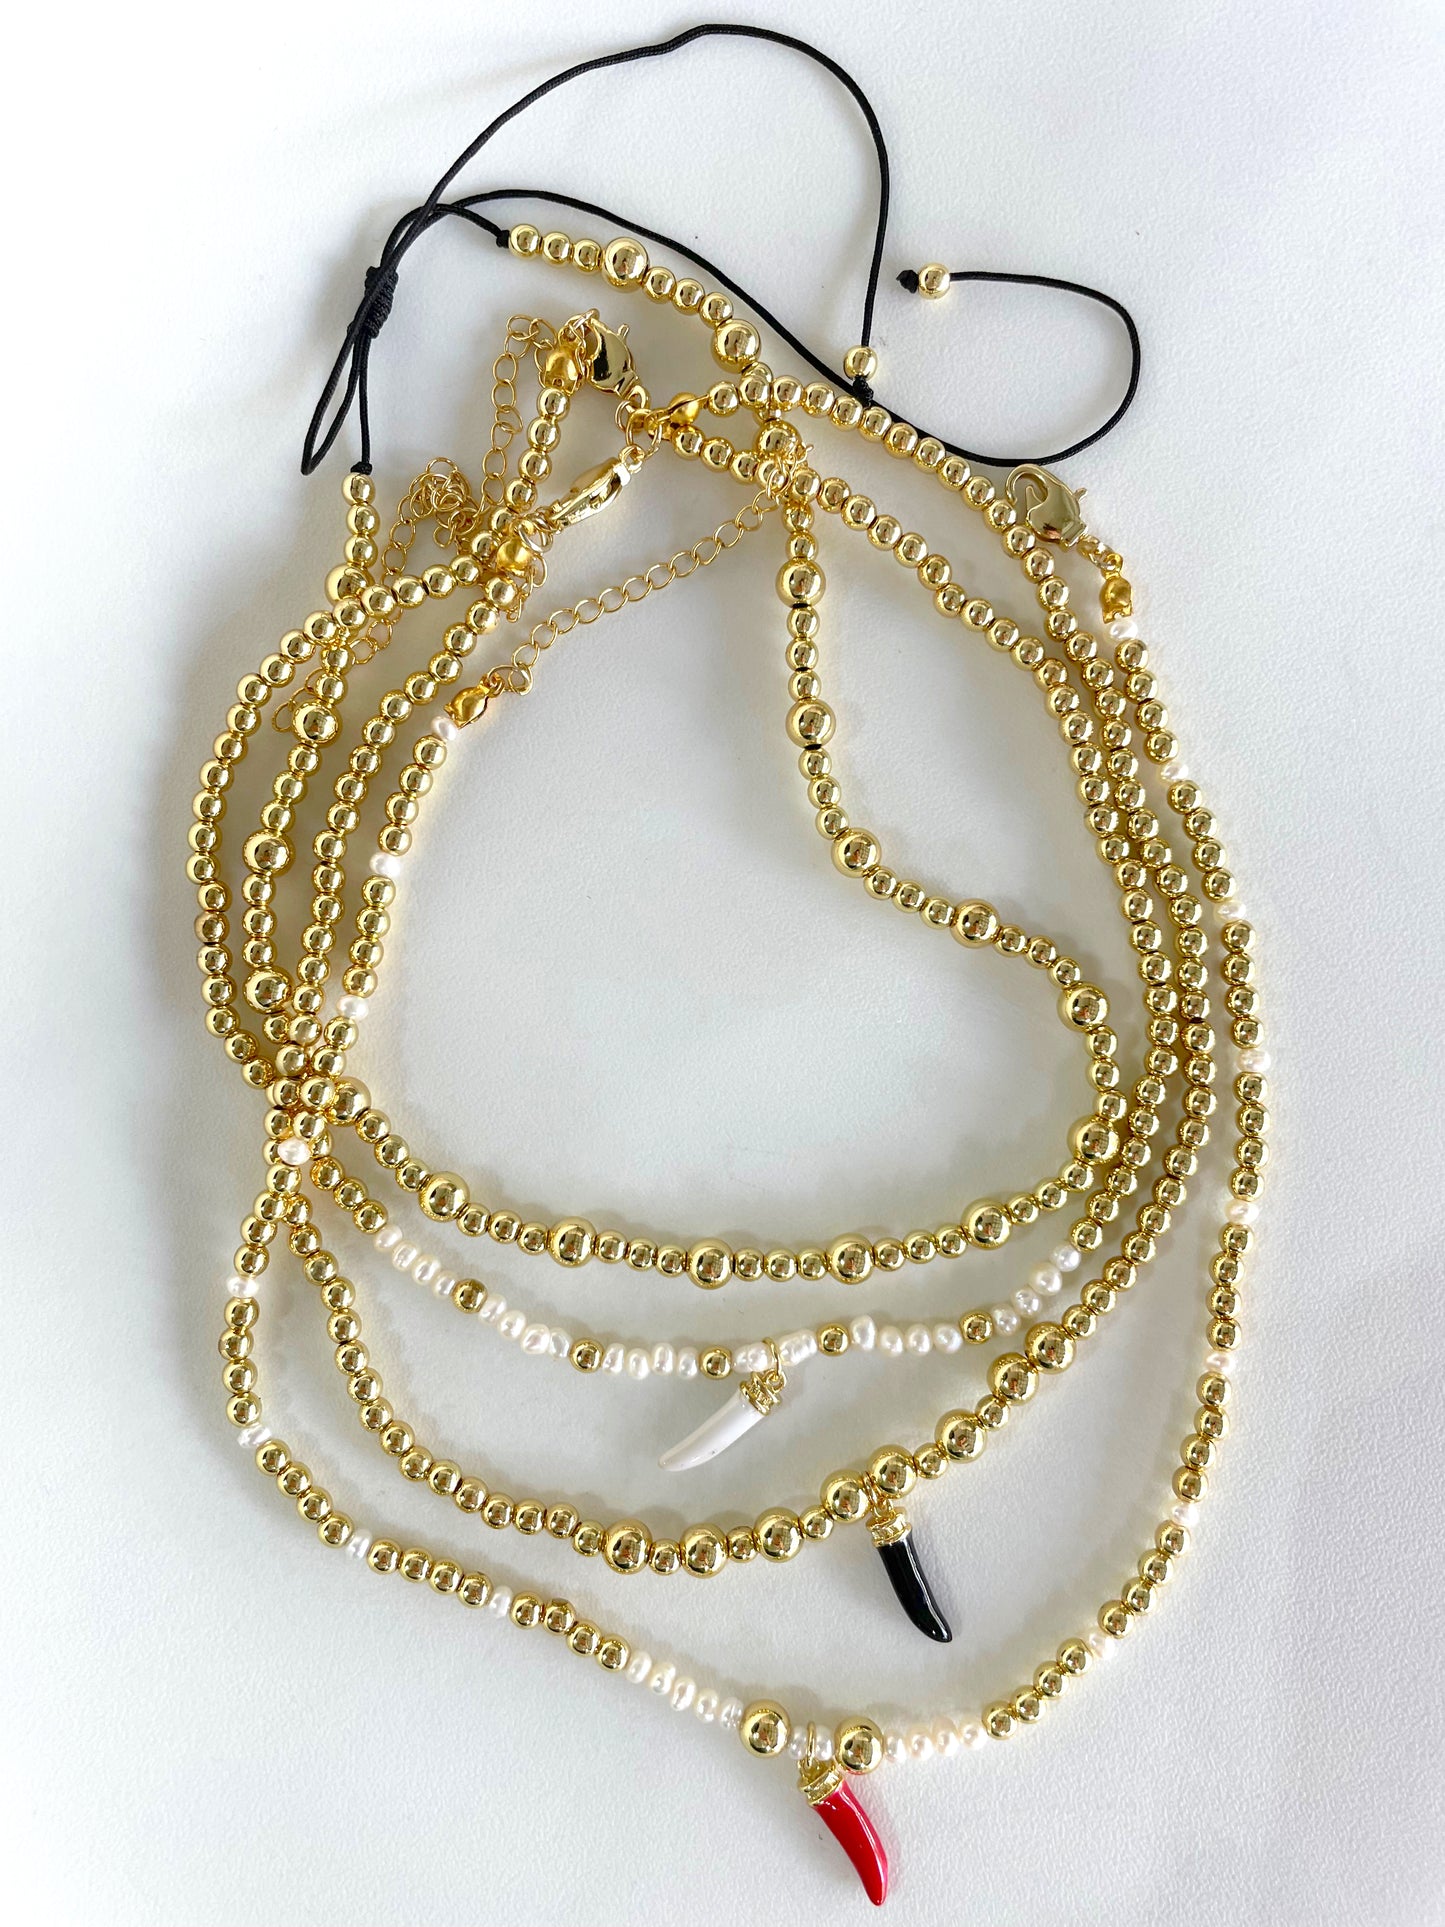 Gold beaded colored tooth necklace